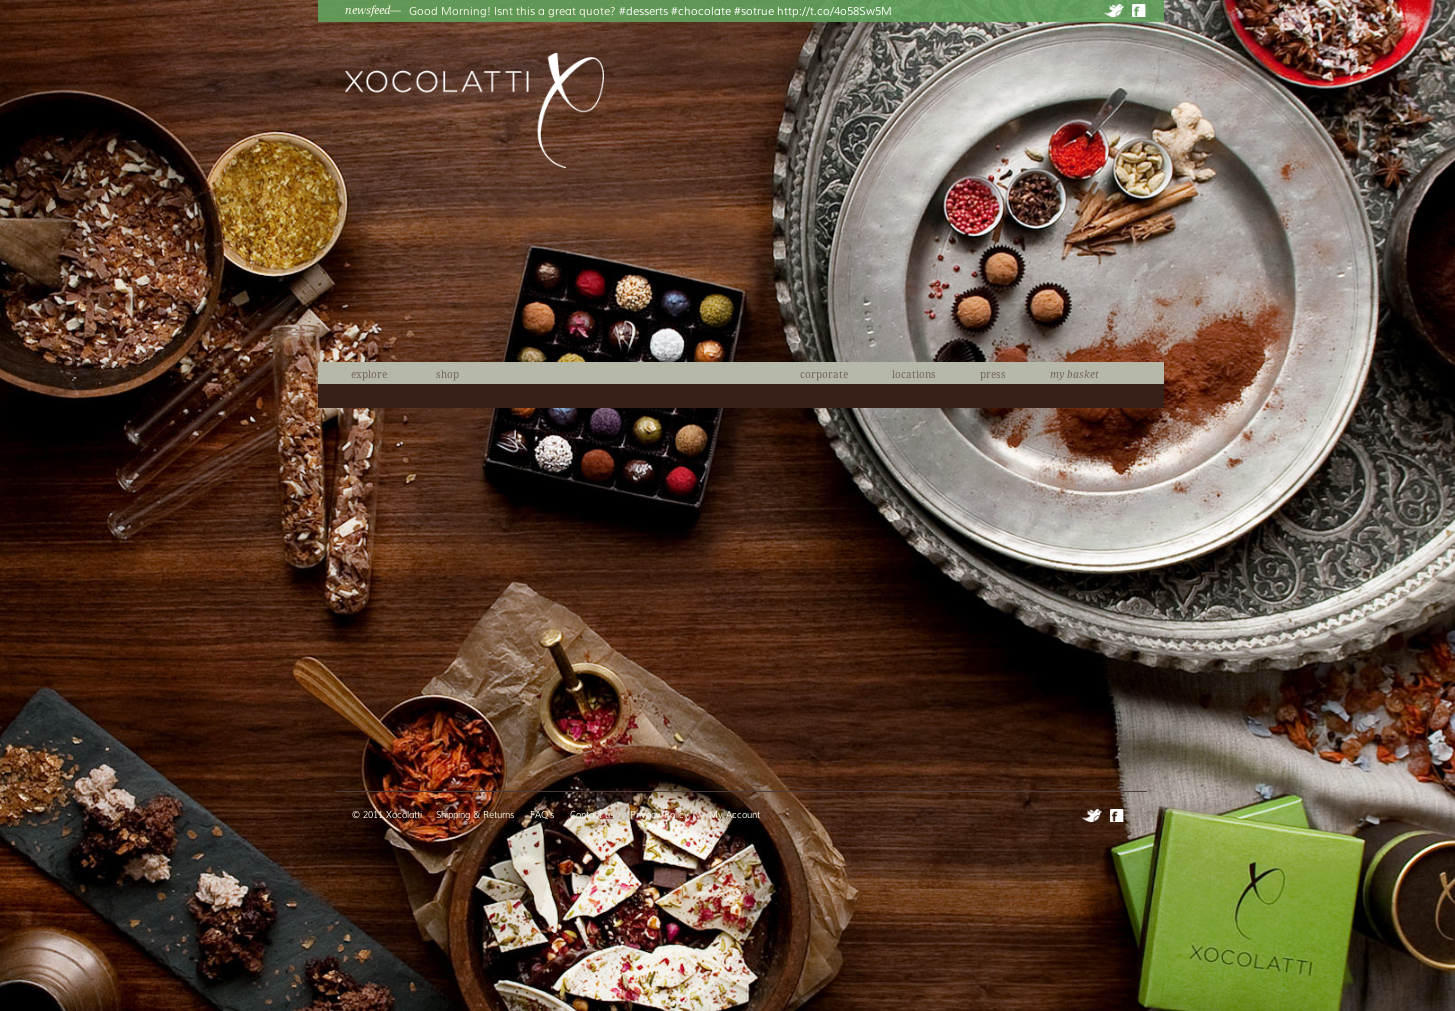 food as art gorgeous gourmet chocolate from xocolatti photo by rachel neville nyc reatil